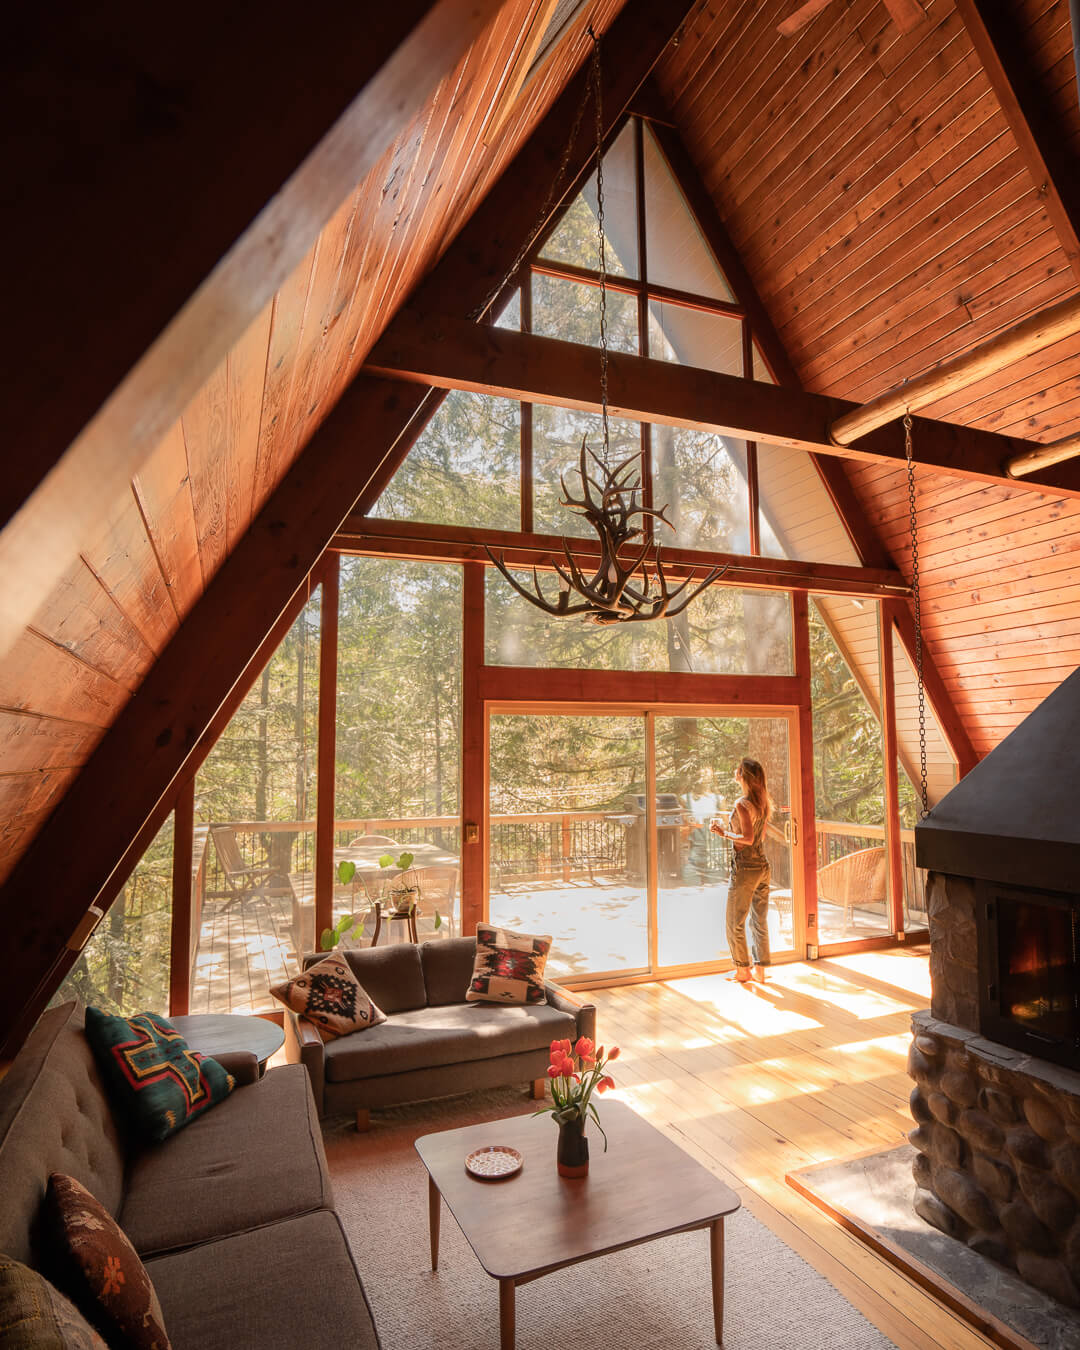 These Mountain Lodges & Cabin-Inspired Interiors Will Give You